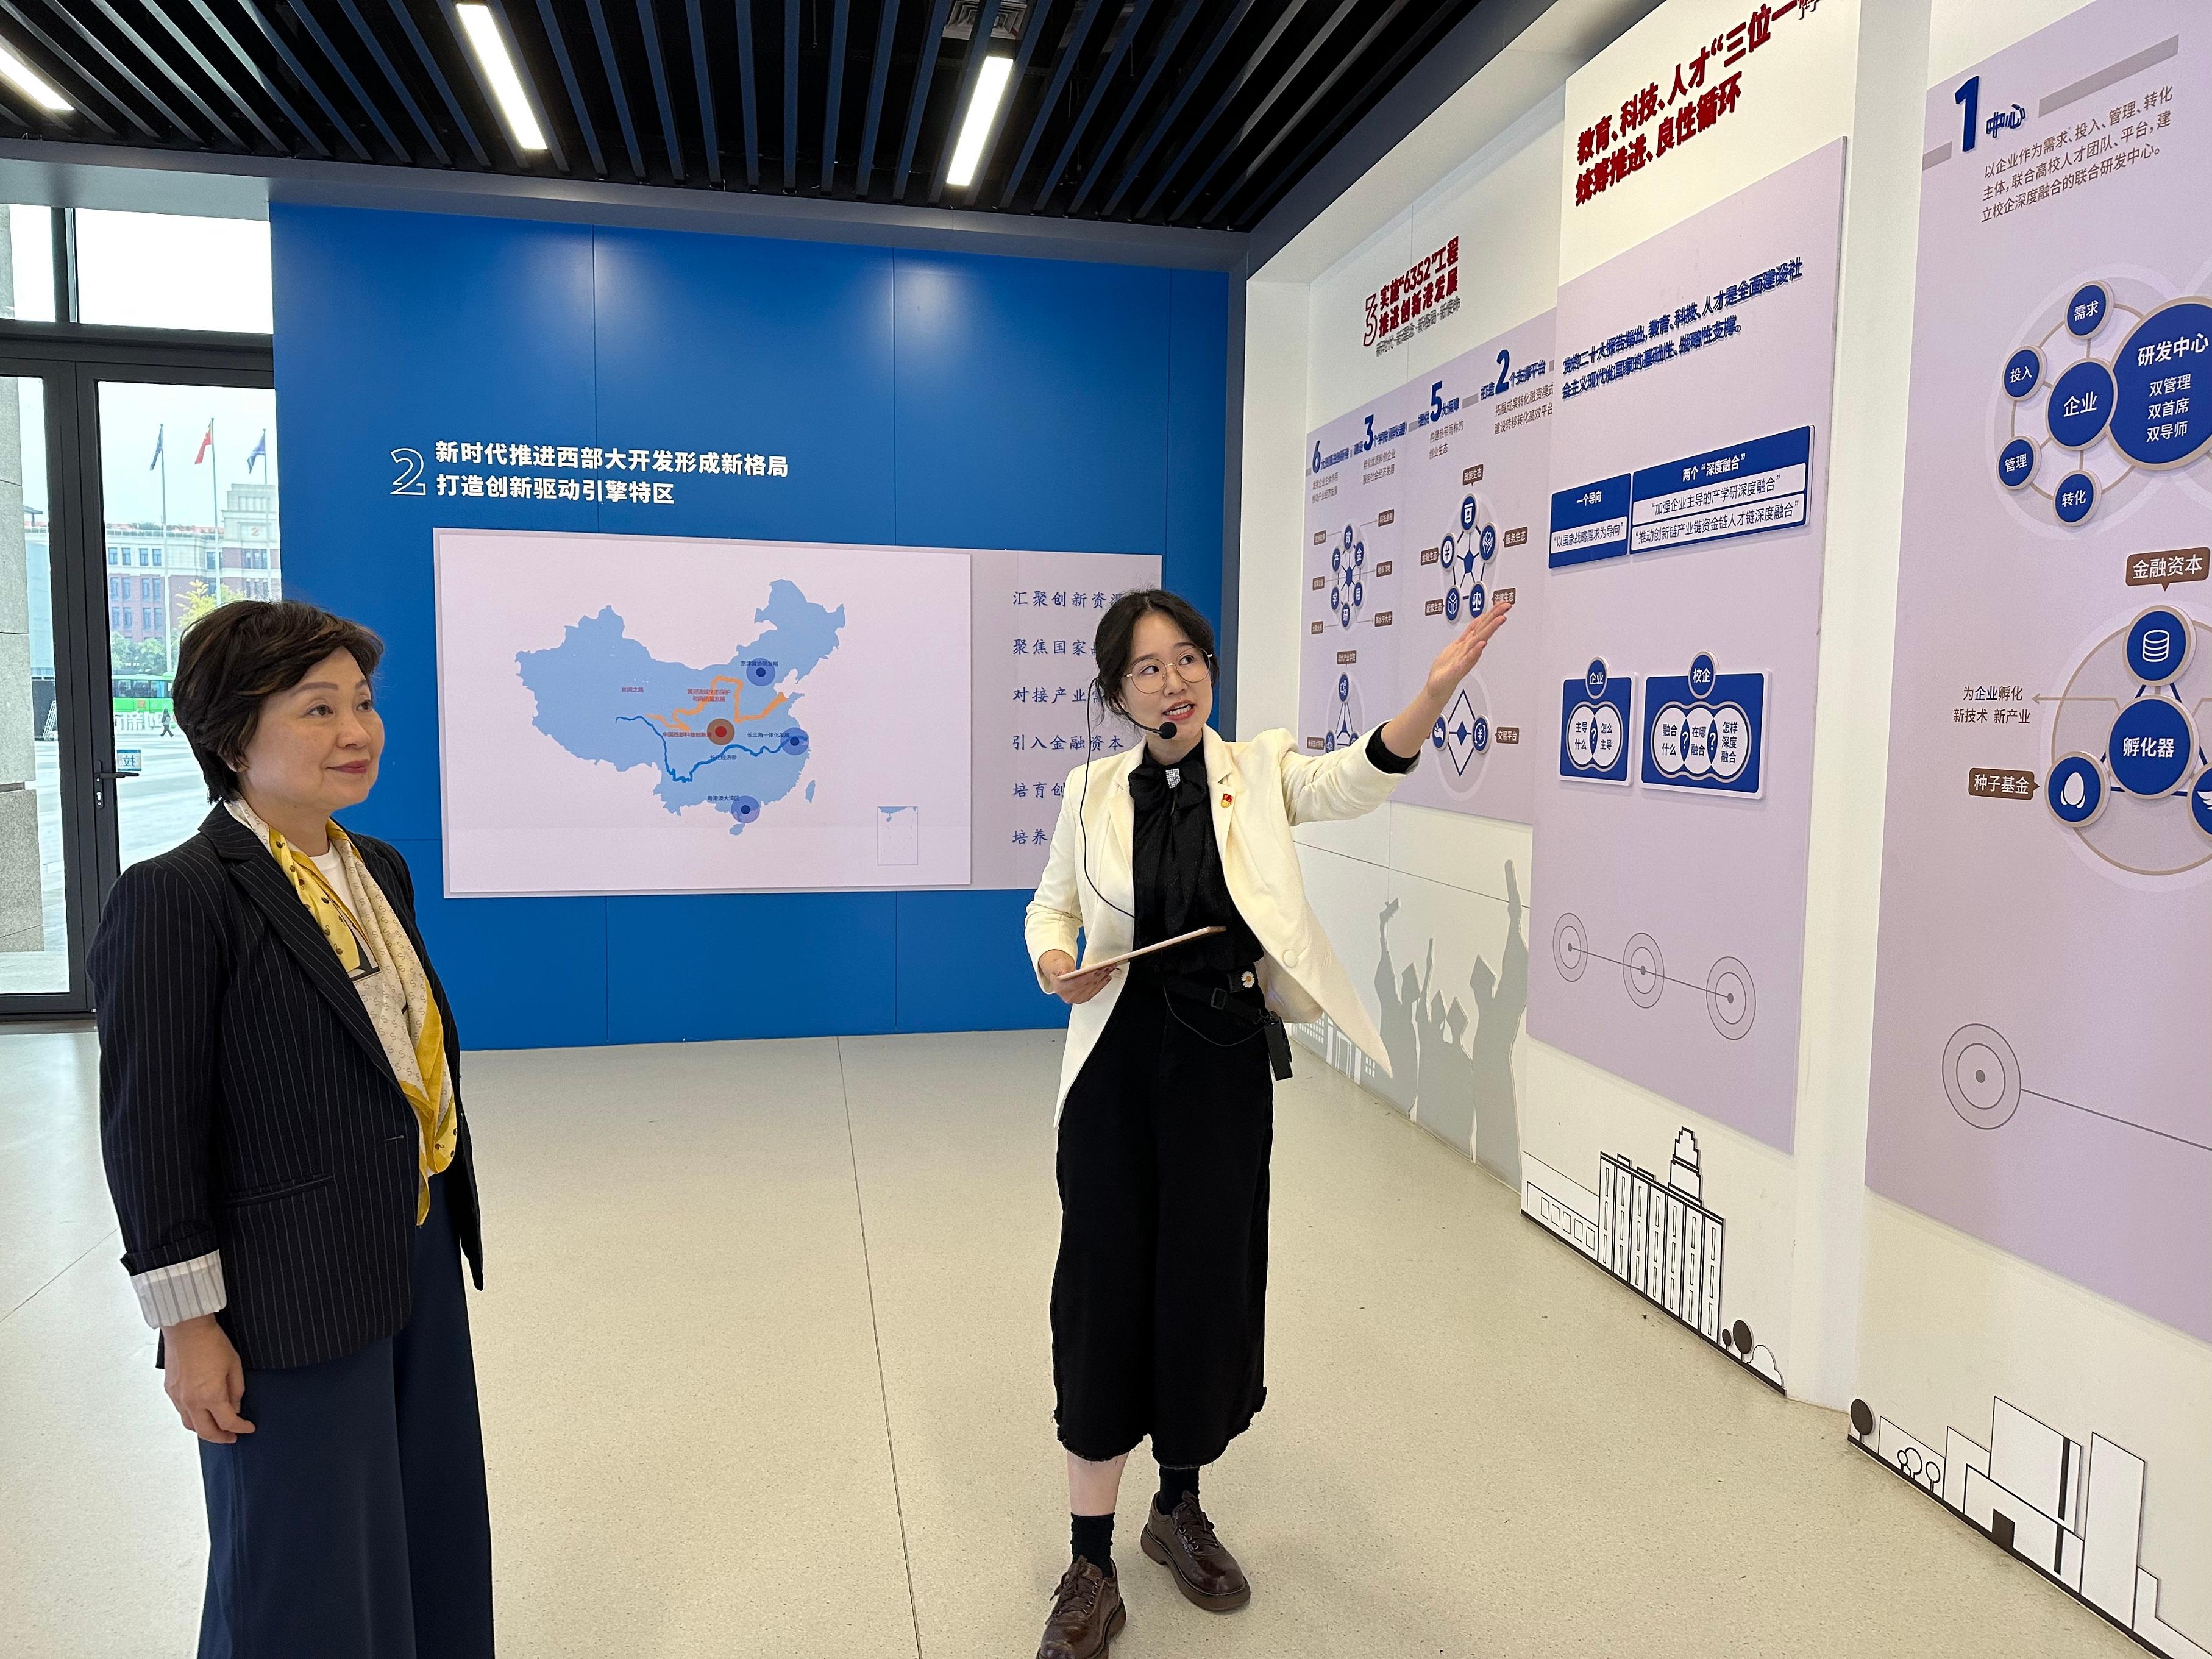 The Secretary for Education, Dr Choi Yuk-lin (left), learned about the latest development of the national advanced technologies during her visit to iHARBOUR in Xi'an on October 8.